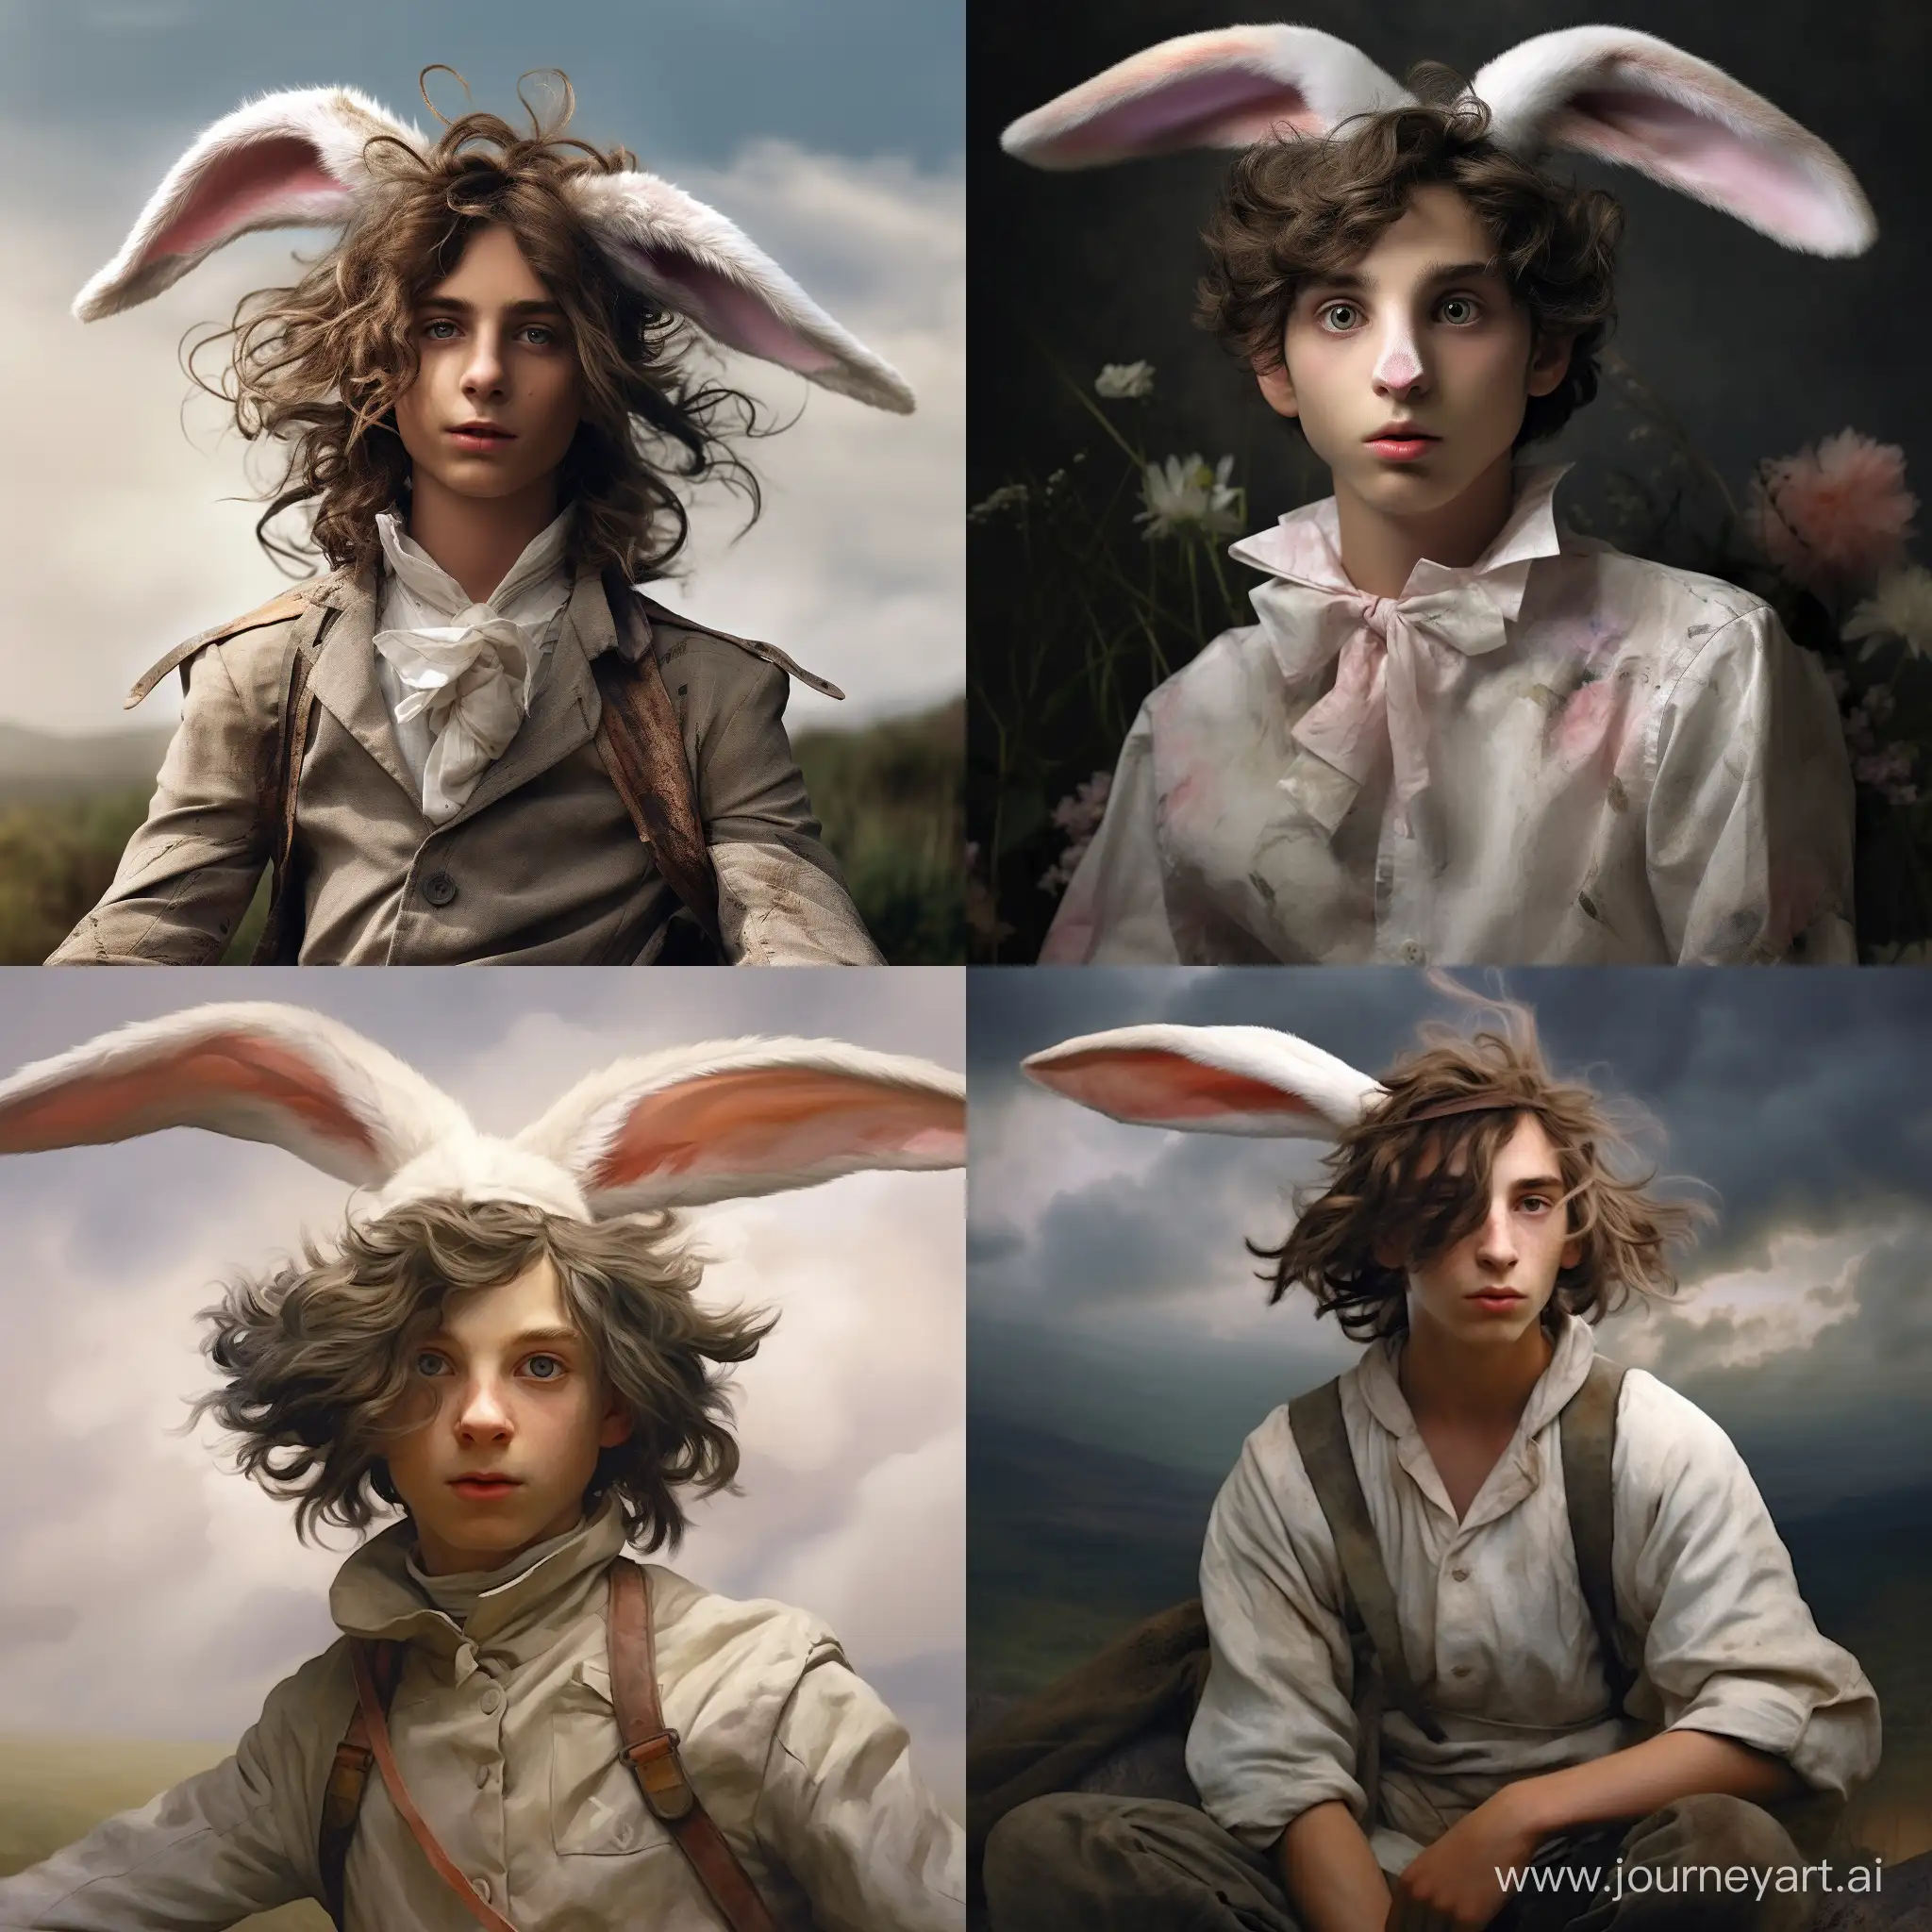 Timothe-Chalamet-in-Bunny-Costume-Playful-11-Aspect-Ratio